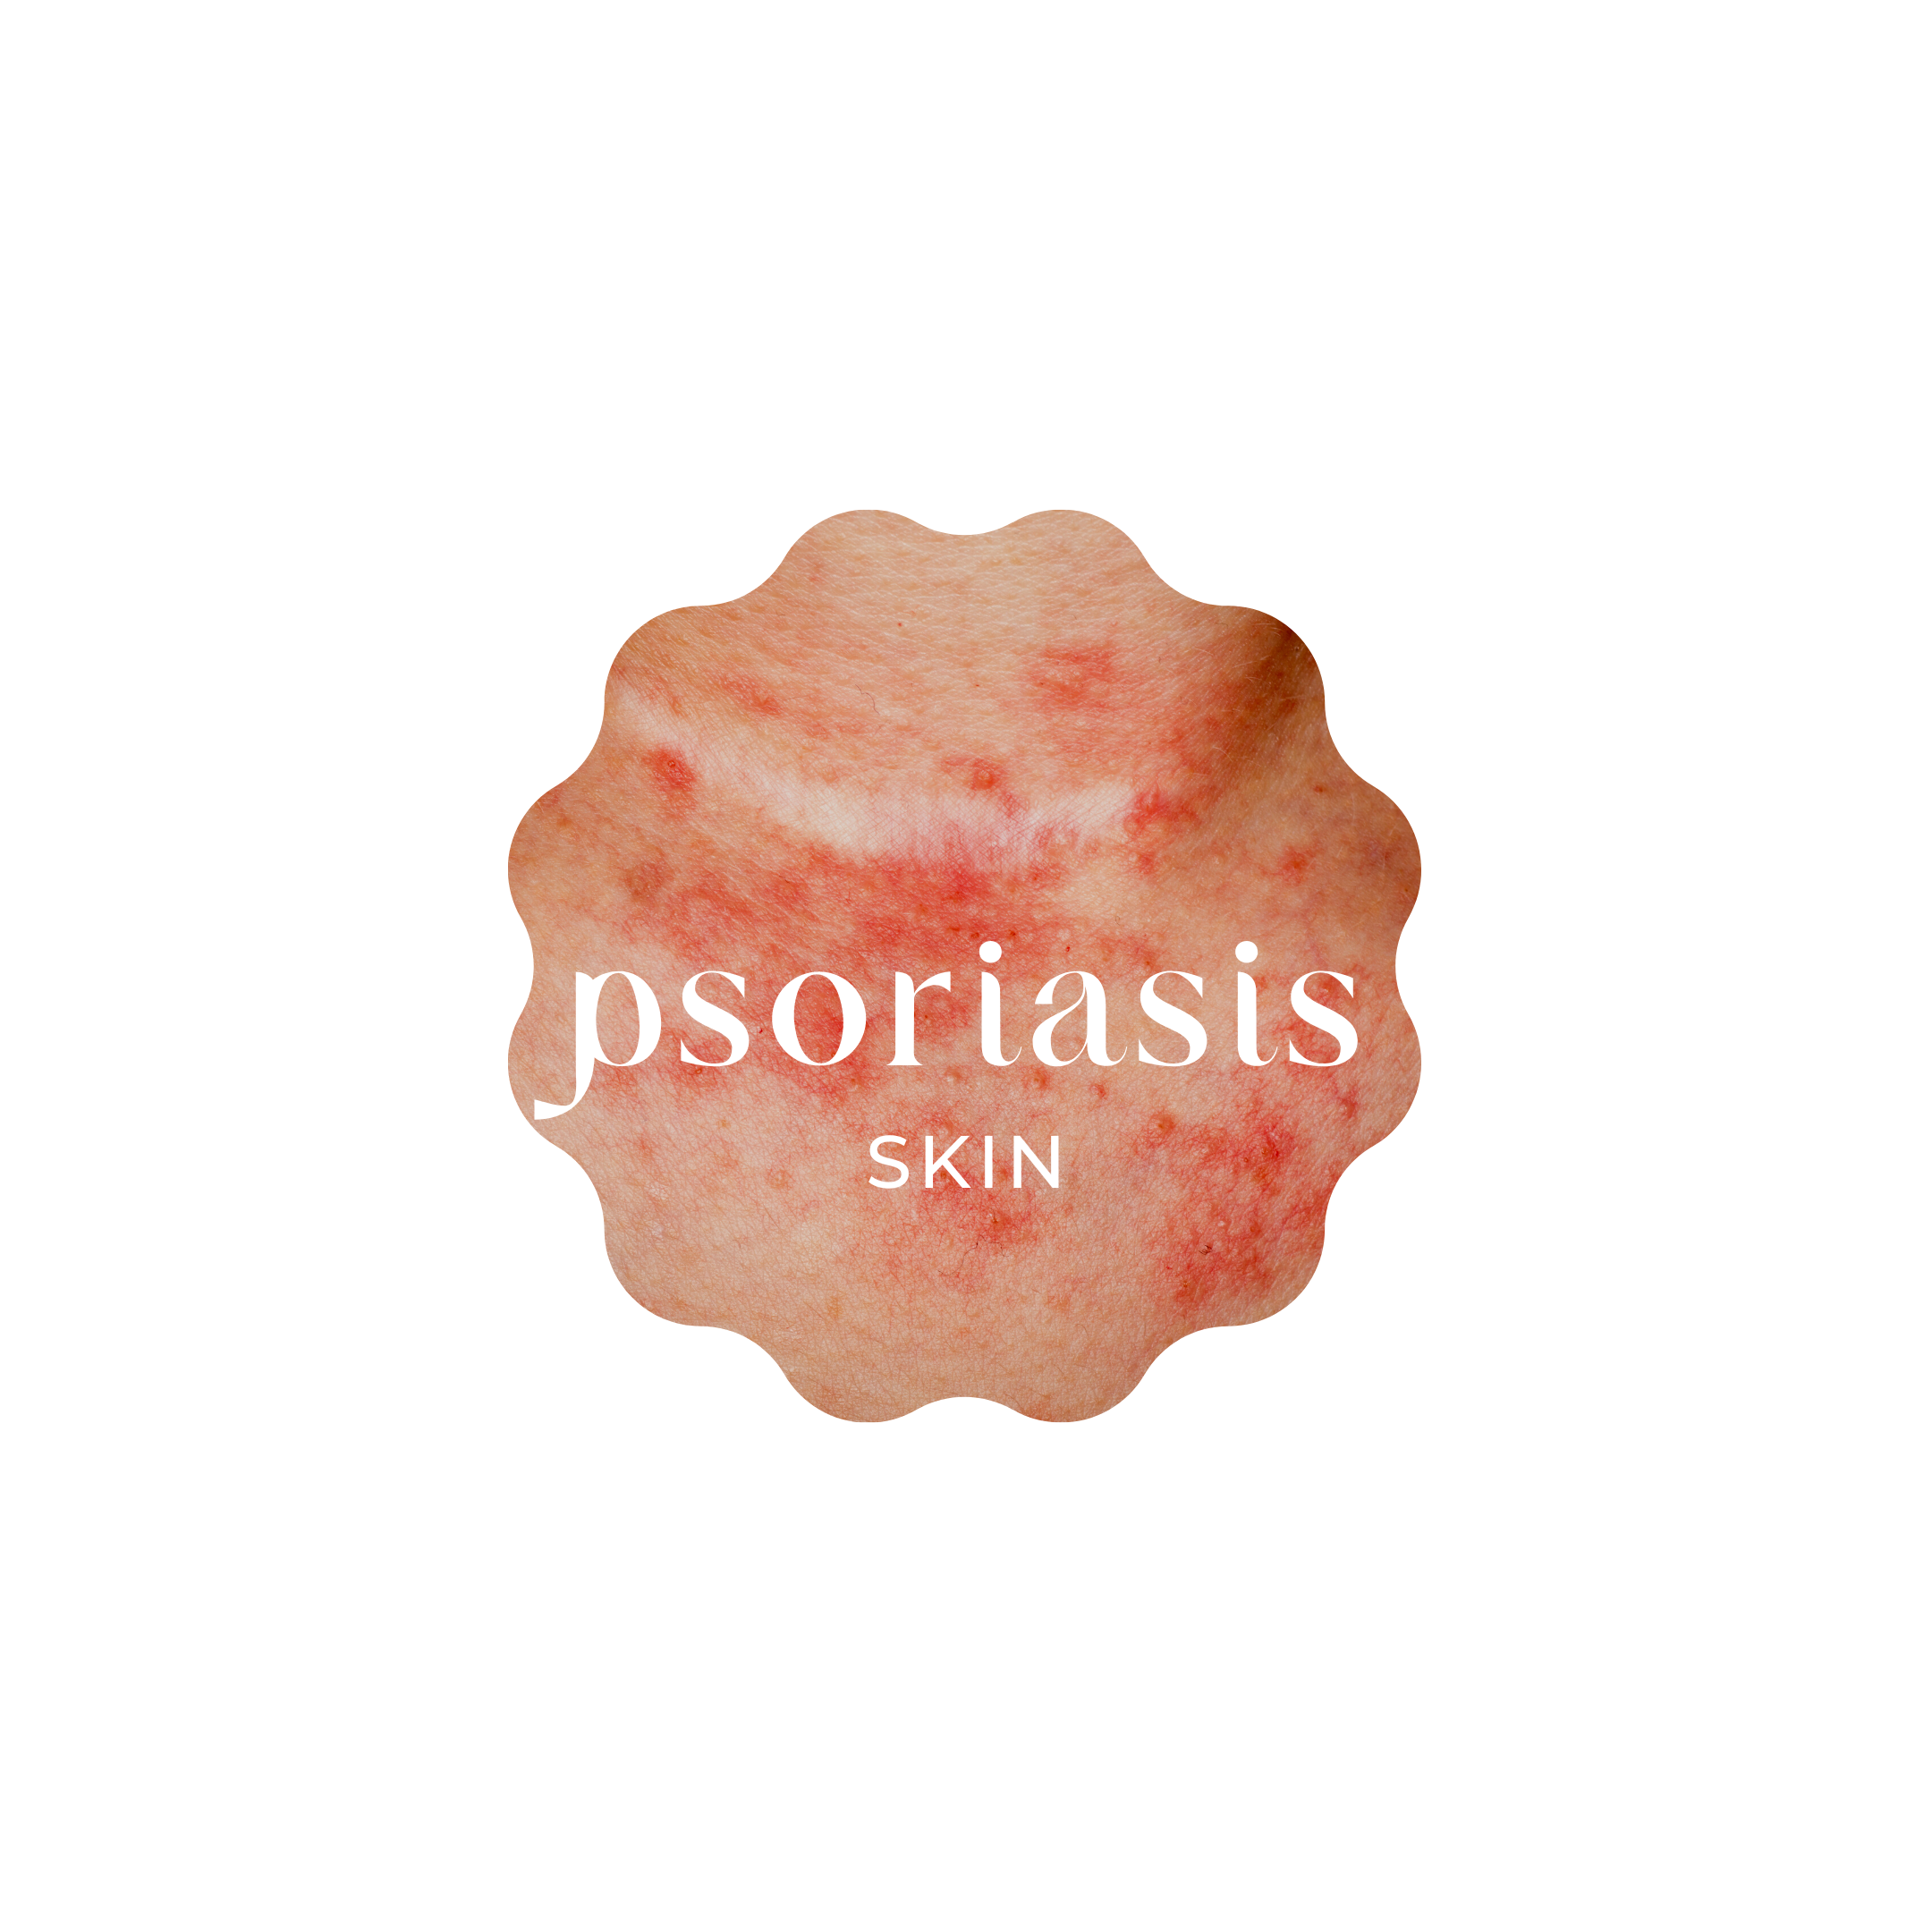 Products Treatments For Psoriasis Skin Condition Narellan Skin Salon Clinic Australian 